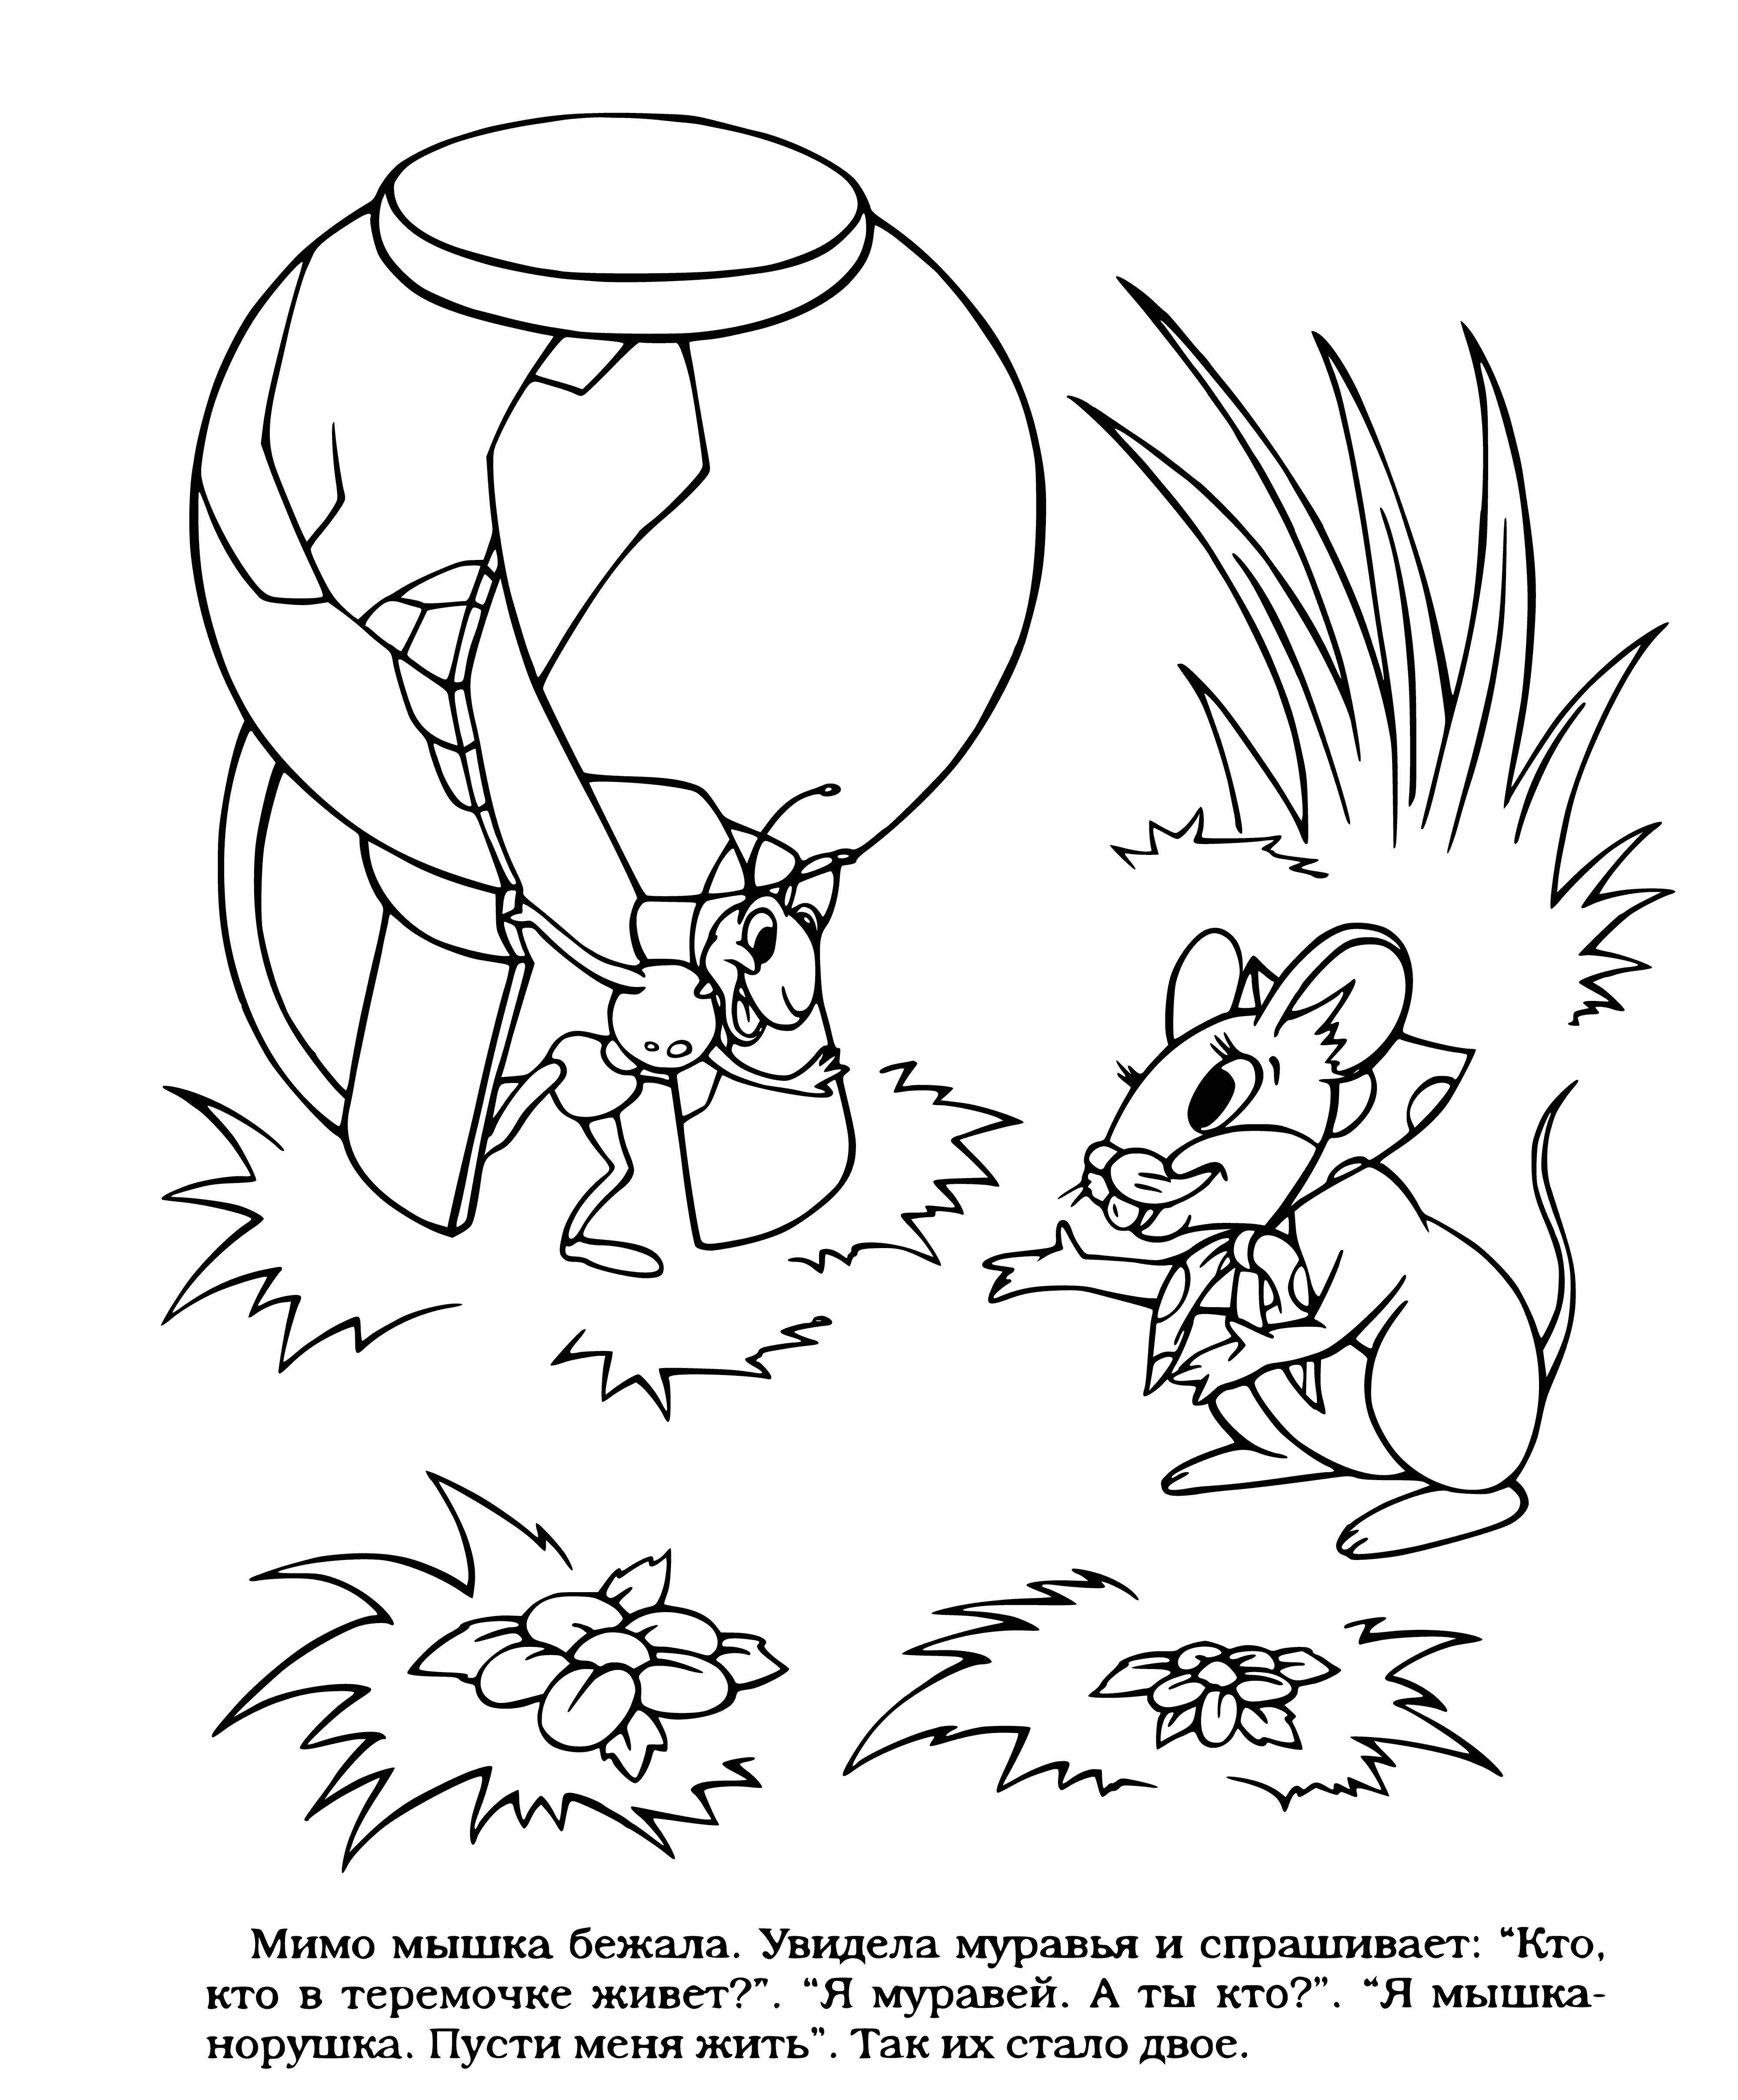 Little mouse coloring page